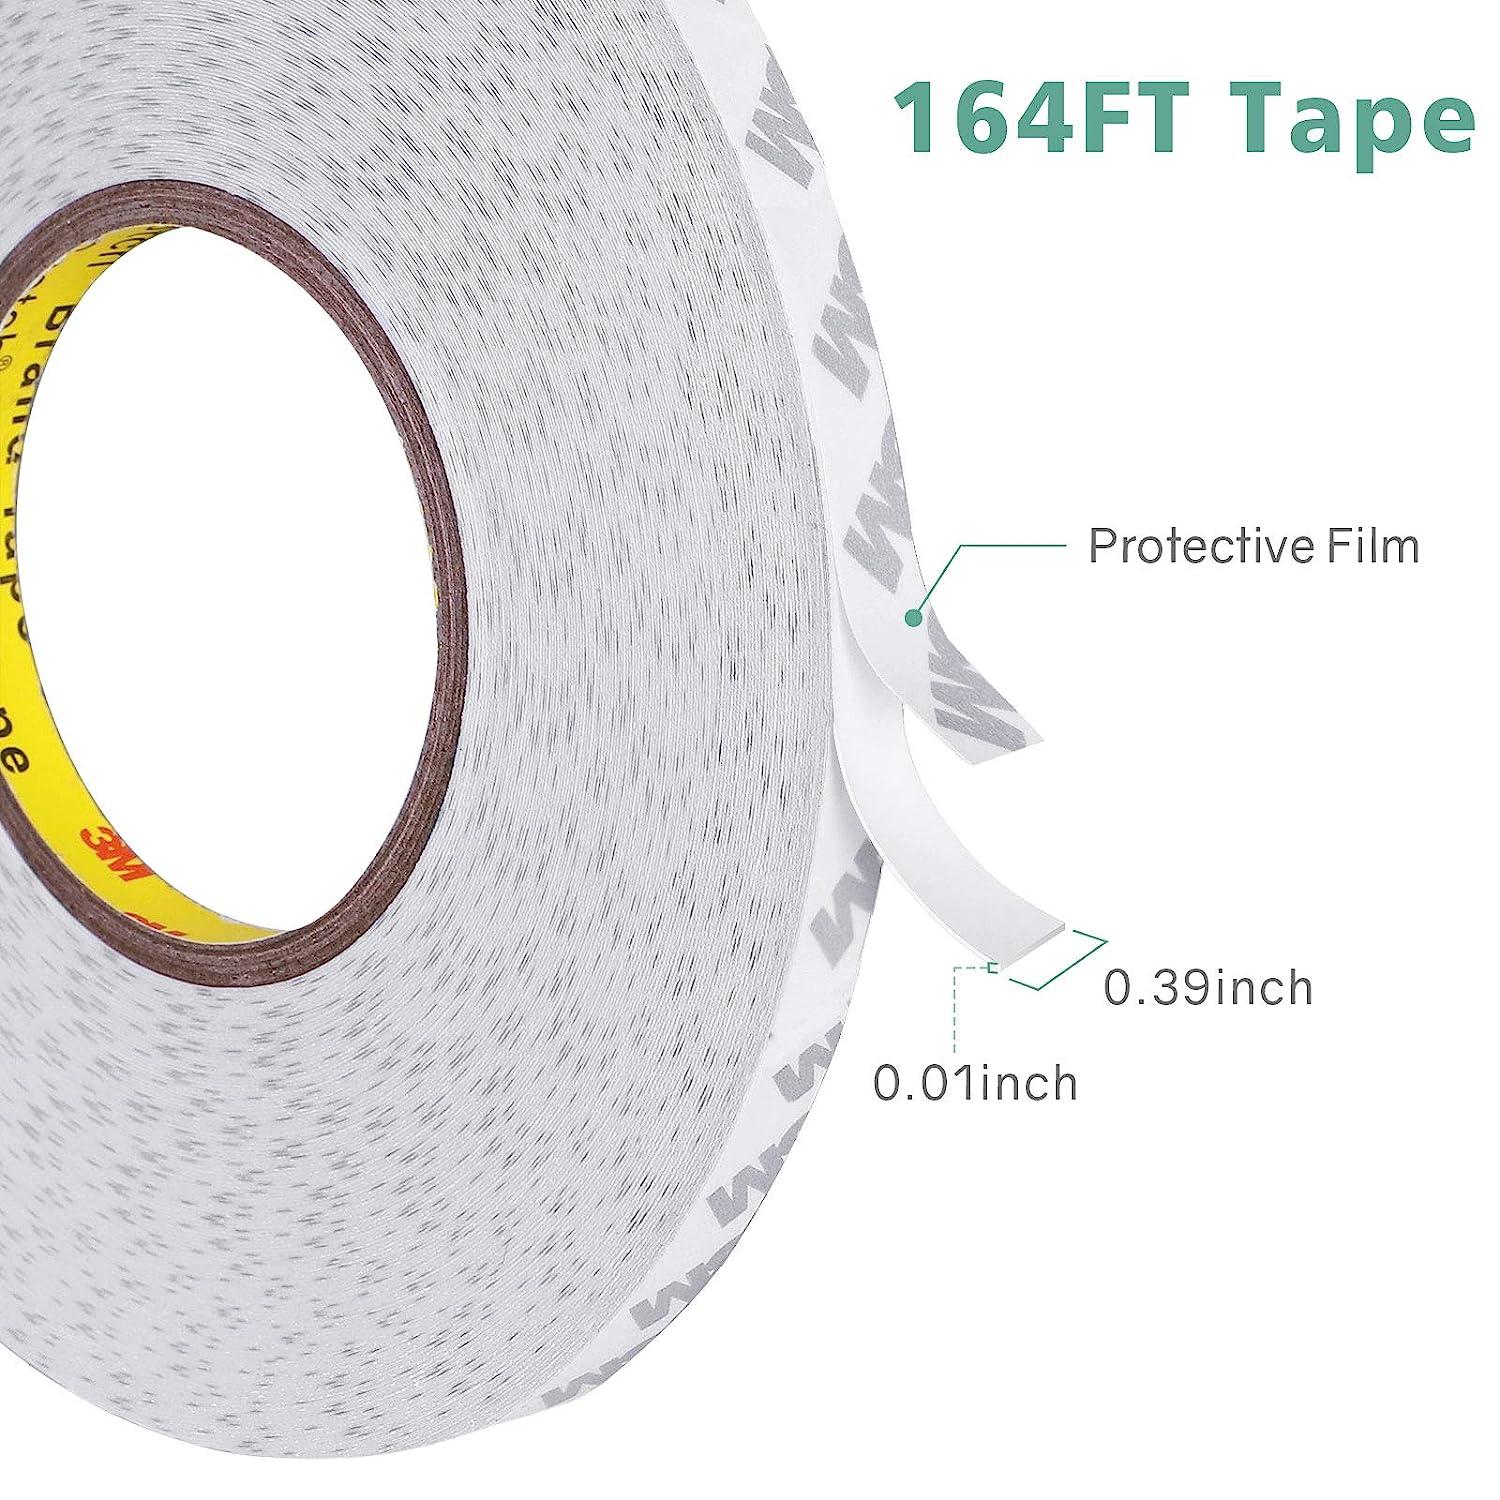 Double Sided Tape Heavy Duty, 164ft Waterproof Mounting Adhesive Tape,  Removable Tape for Walls, Poster, LED Strip, Car Trim, Home/Office Decor,  Craft